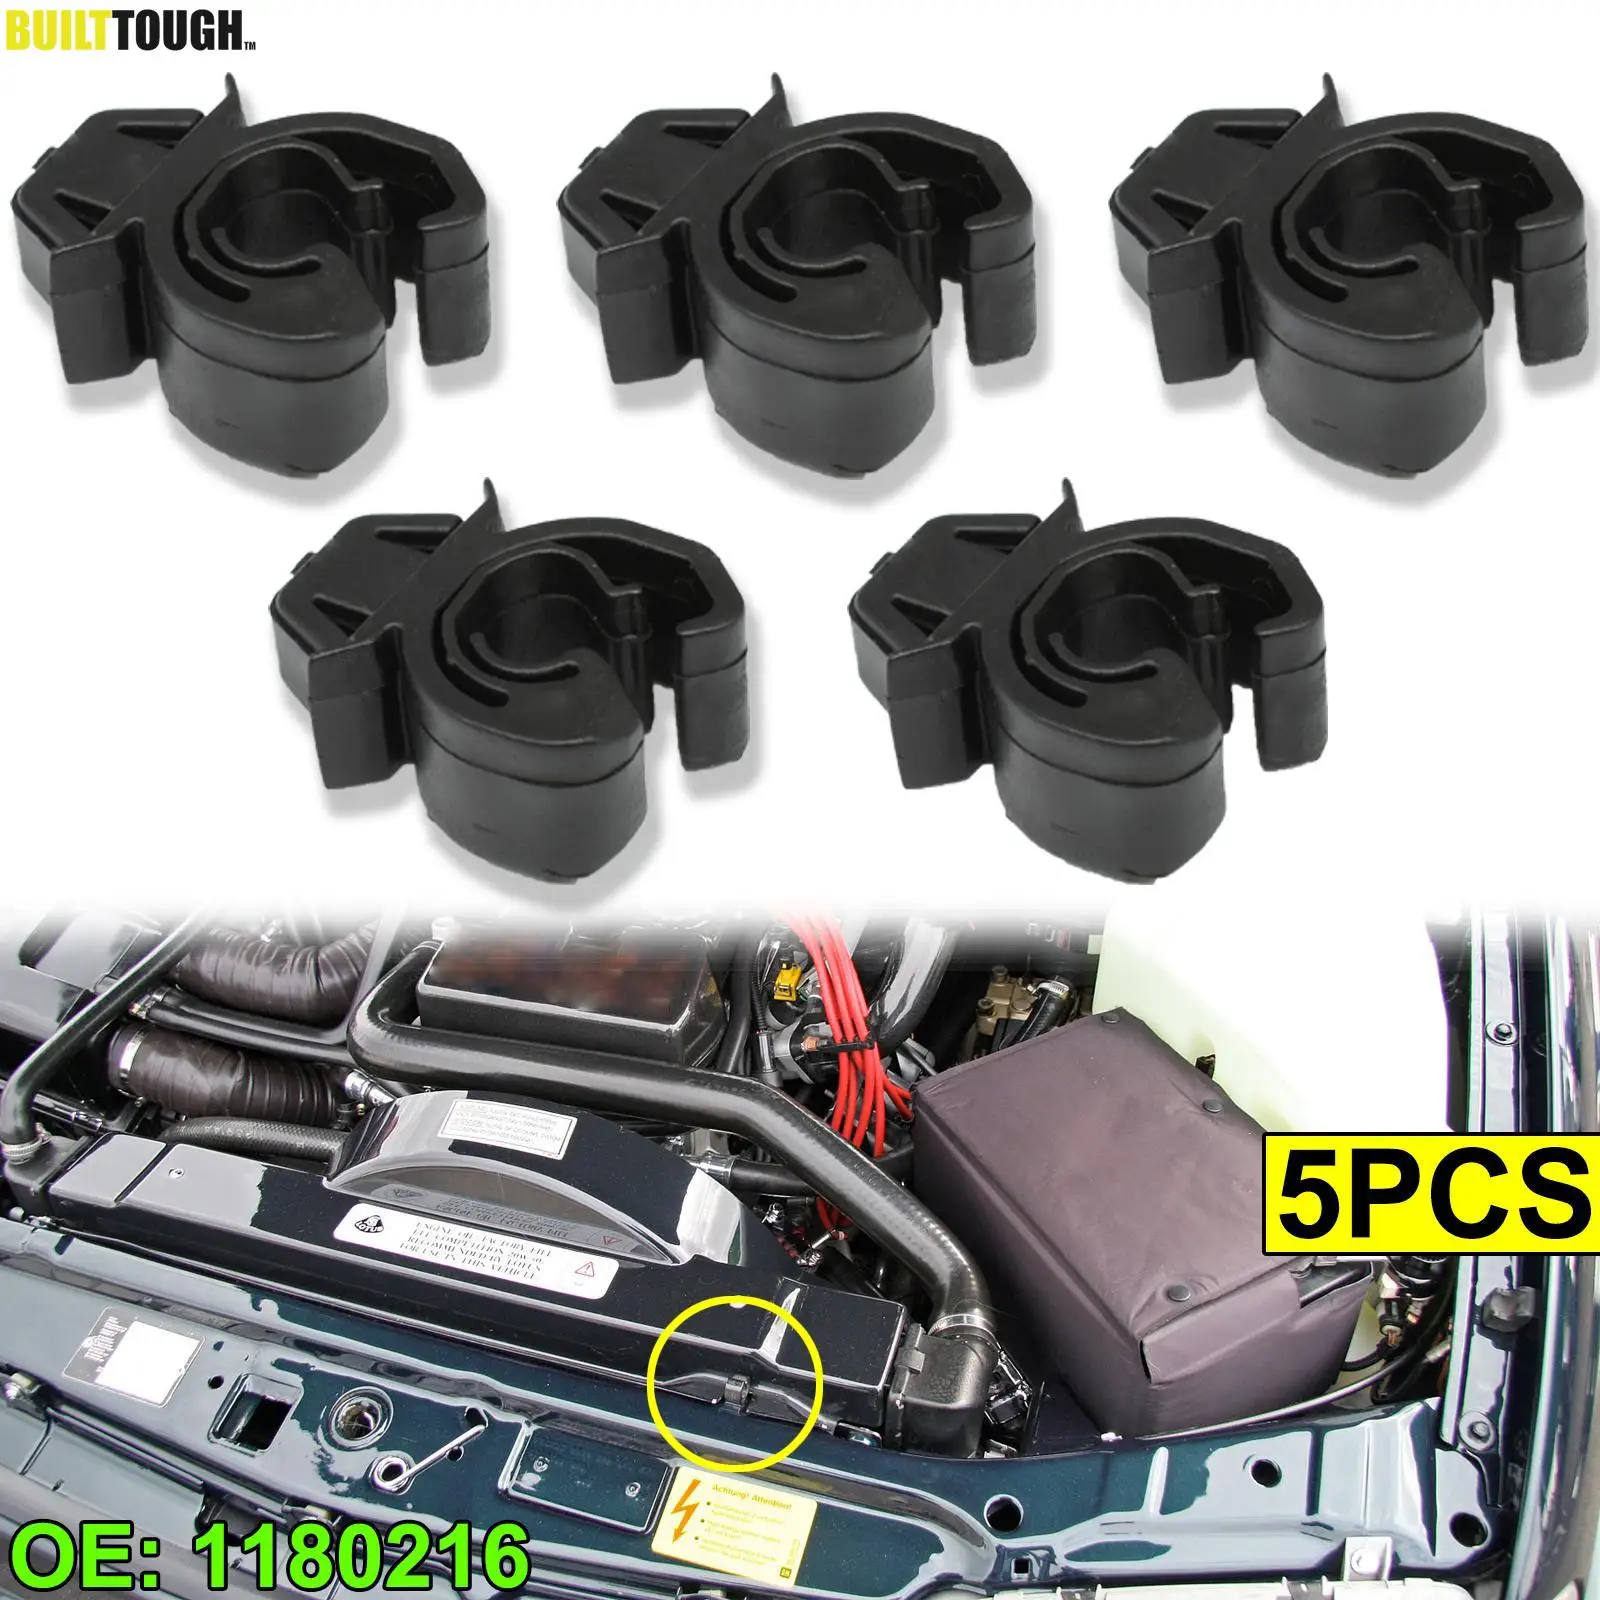 

5pcs For Opel Vauxhall Vectra Zafira Astra Tigra Corsa Hood Bonnet Rod Stay Support Prop Clip 1180216 Holder Clamp Fastener